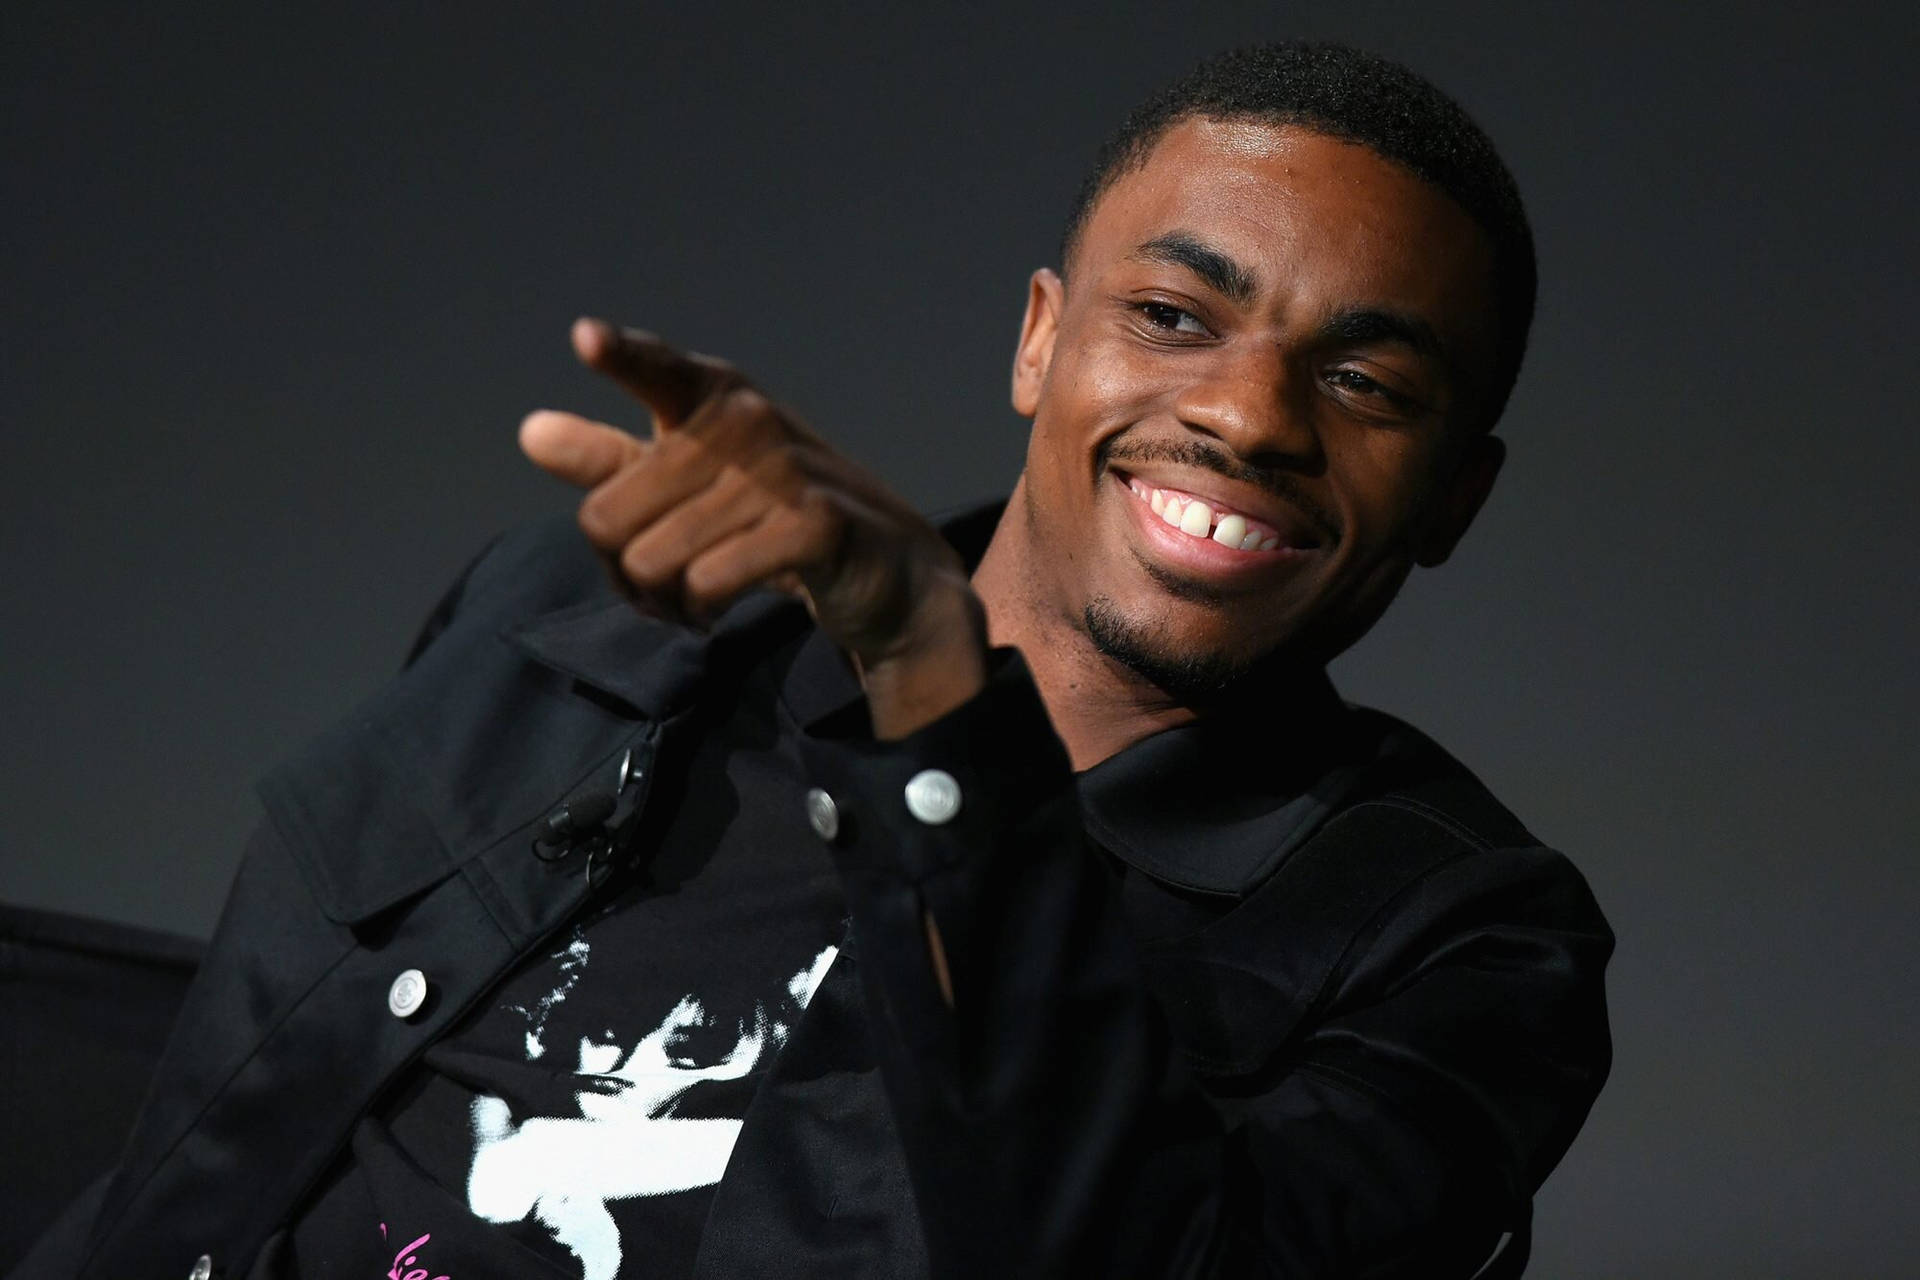 Smiling Vince Staples Background